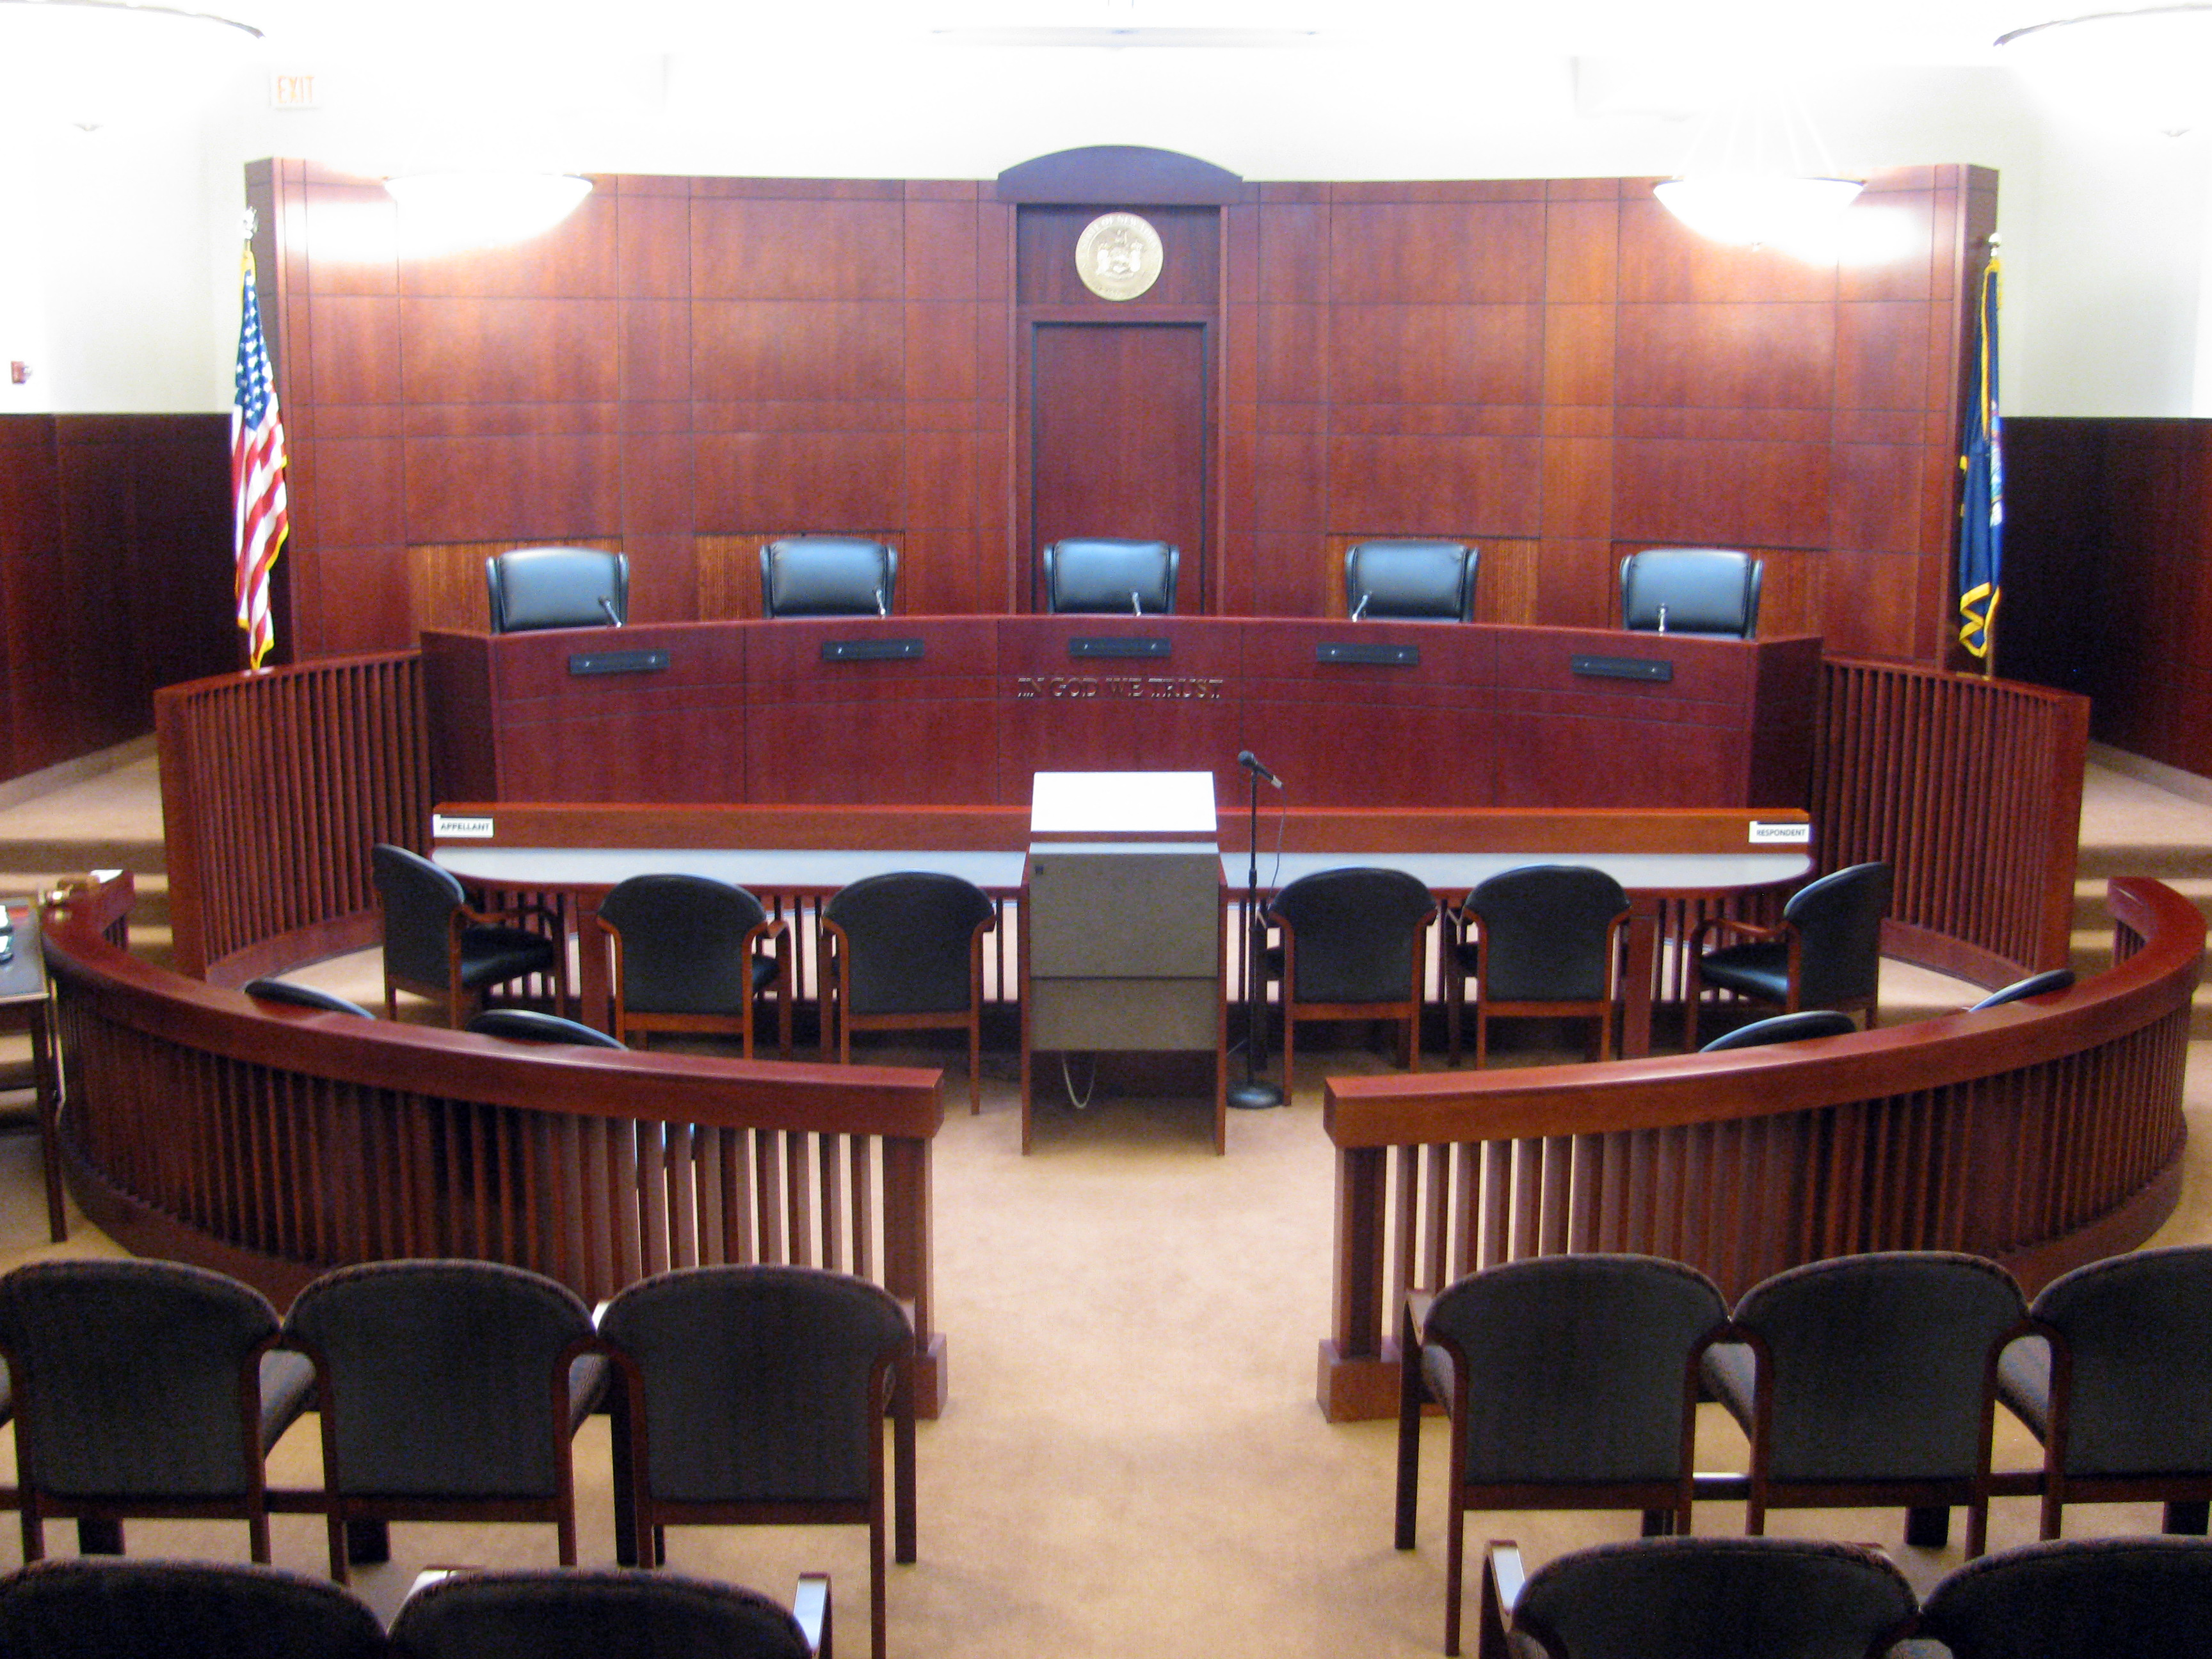 Appellate Courtroom II